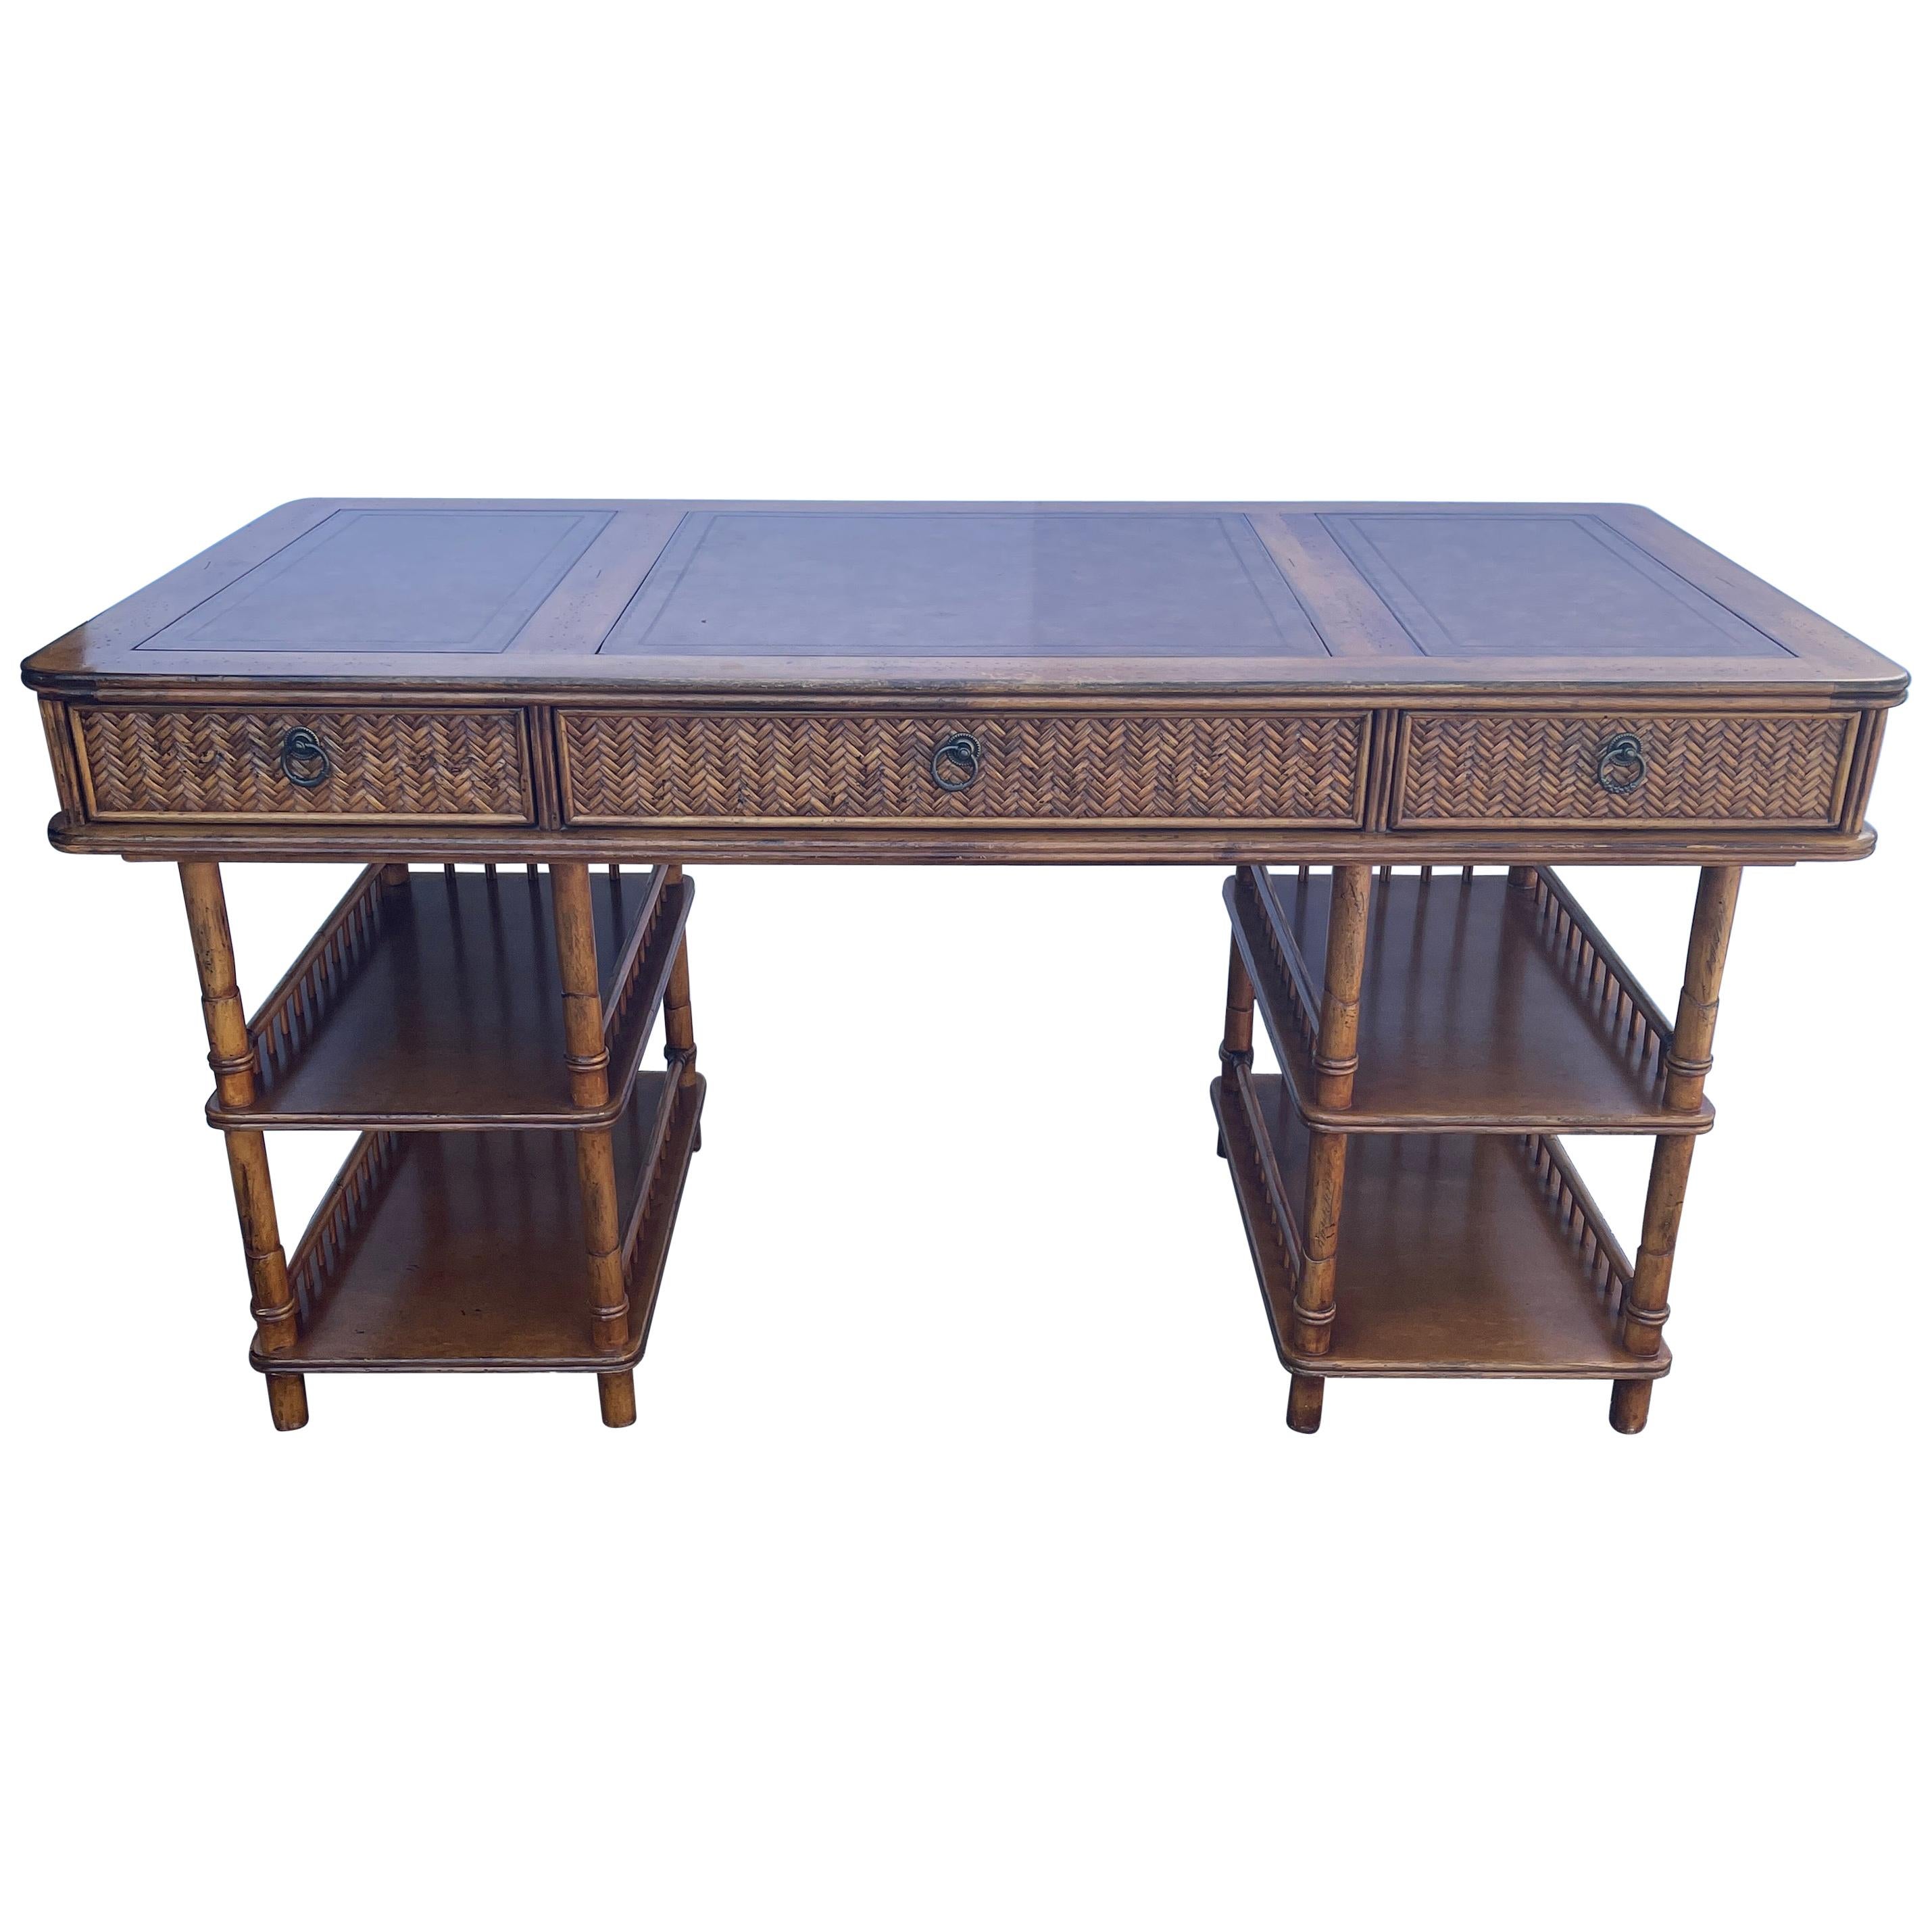 Vintage Colonial Style Faux Bamboo Writing Desk With Glass Top